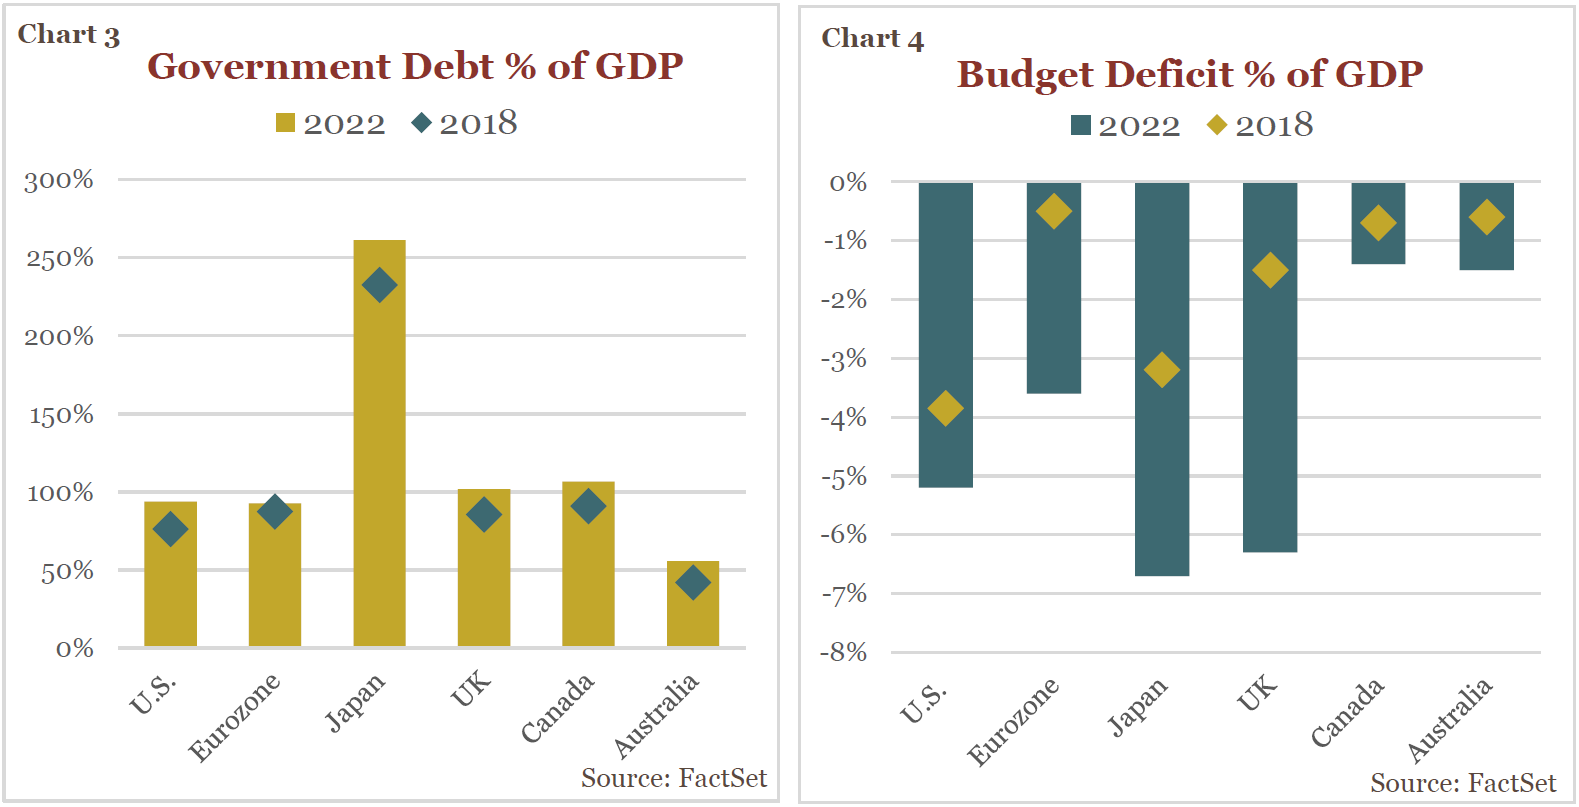 Government Debt % of GDP and Budget Deficit % of GDP